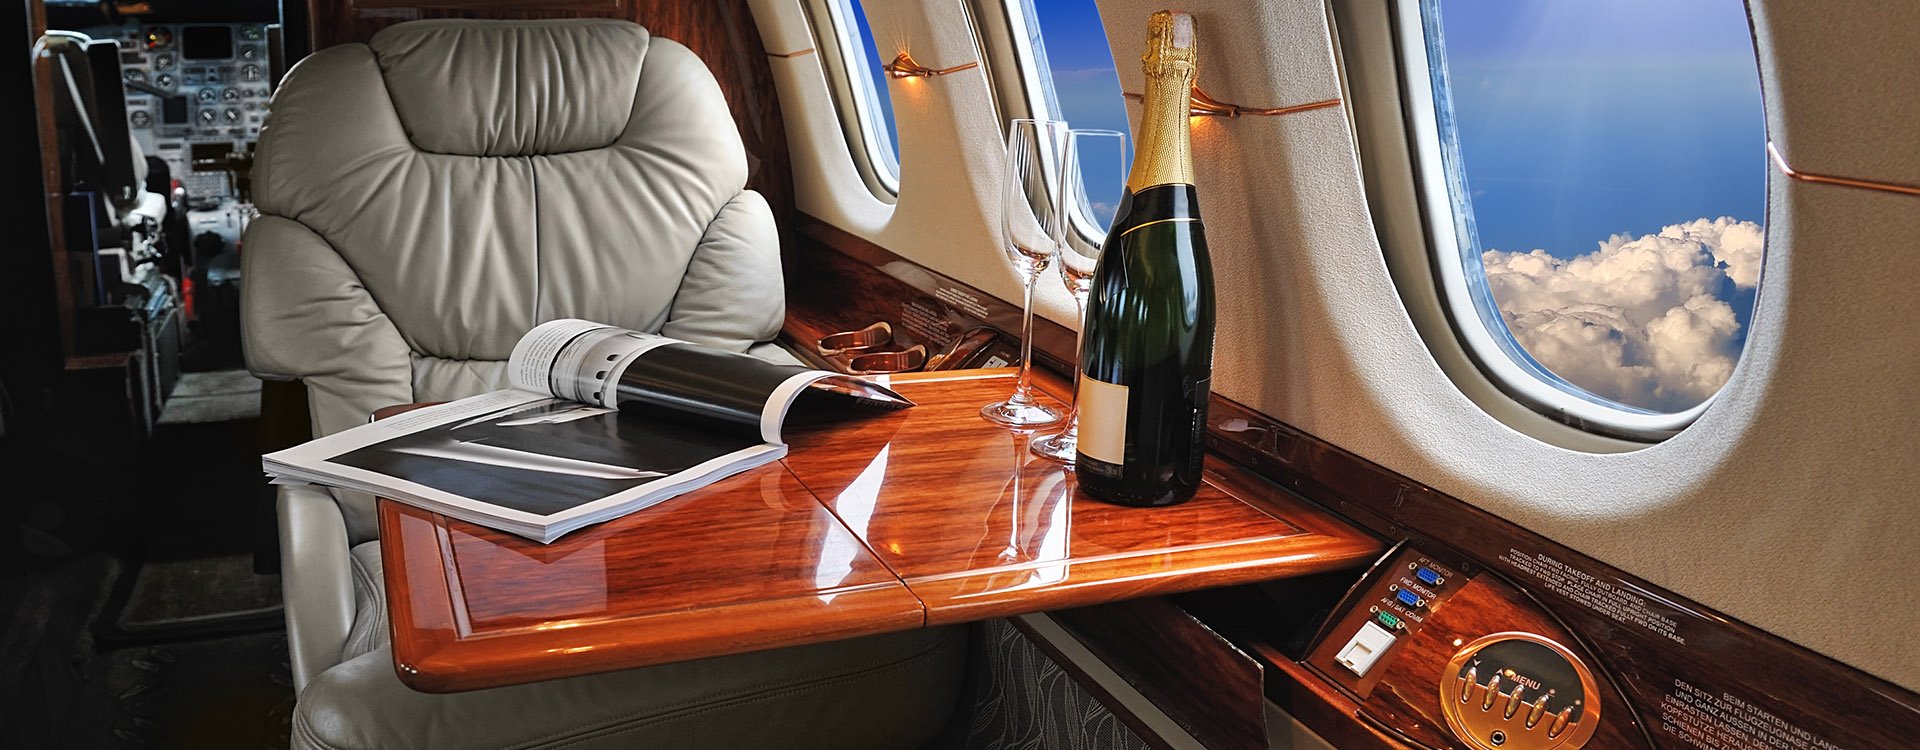 Generic jet interior with champagne